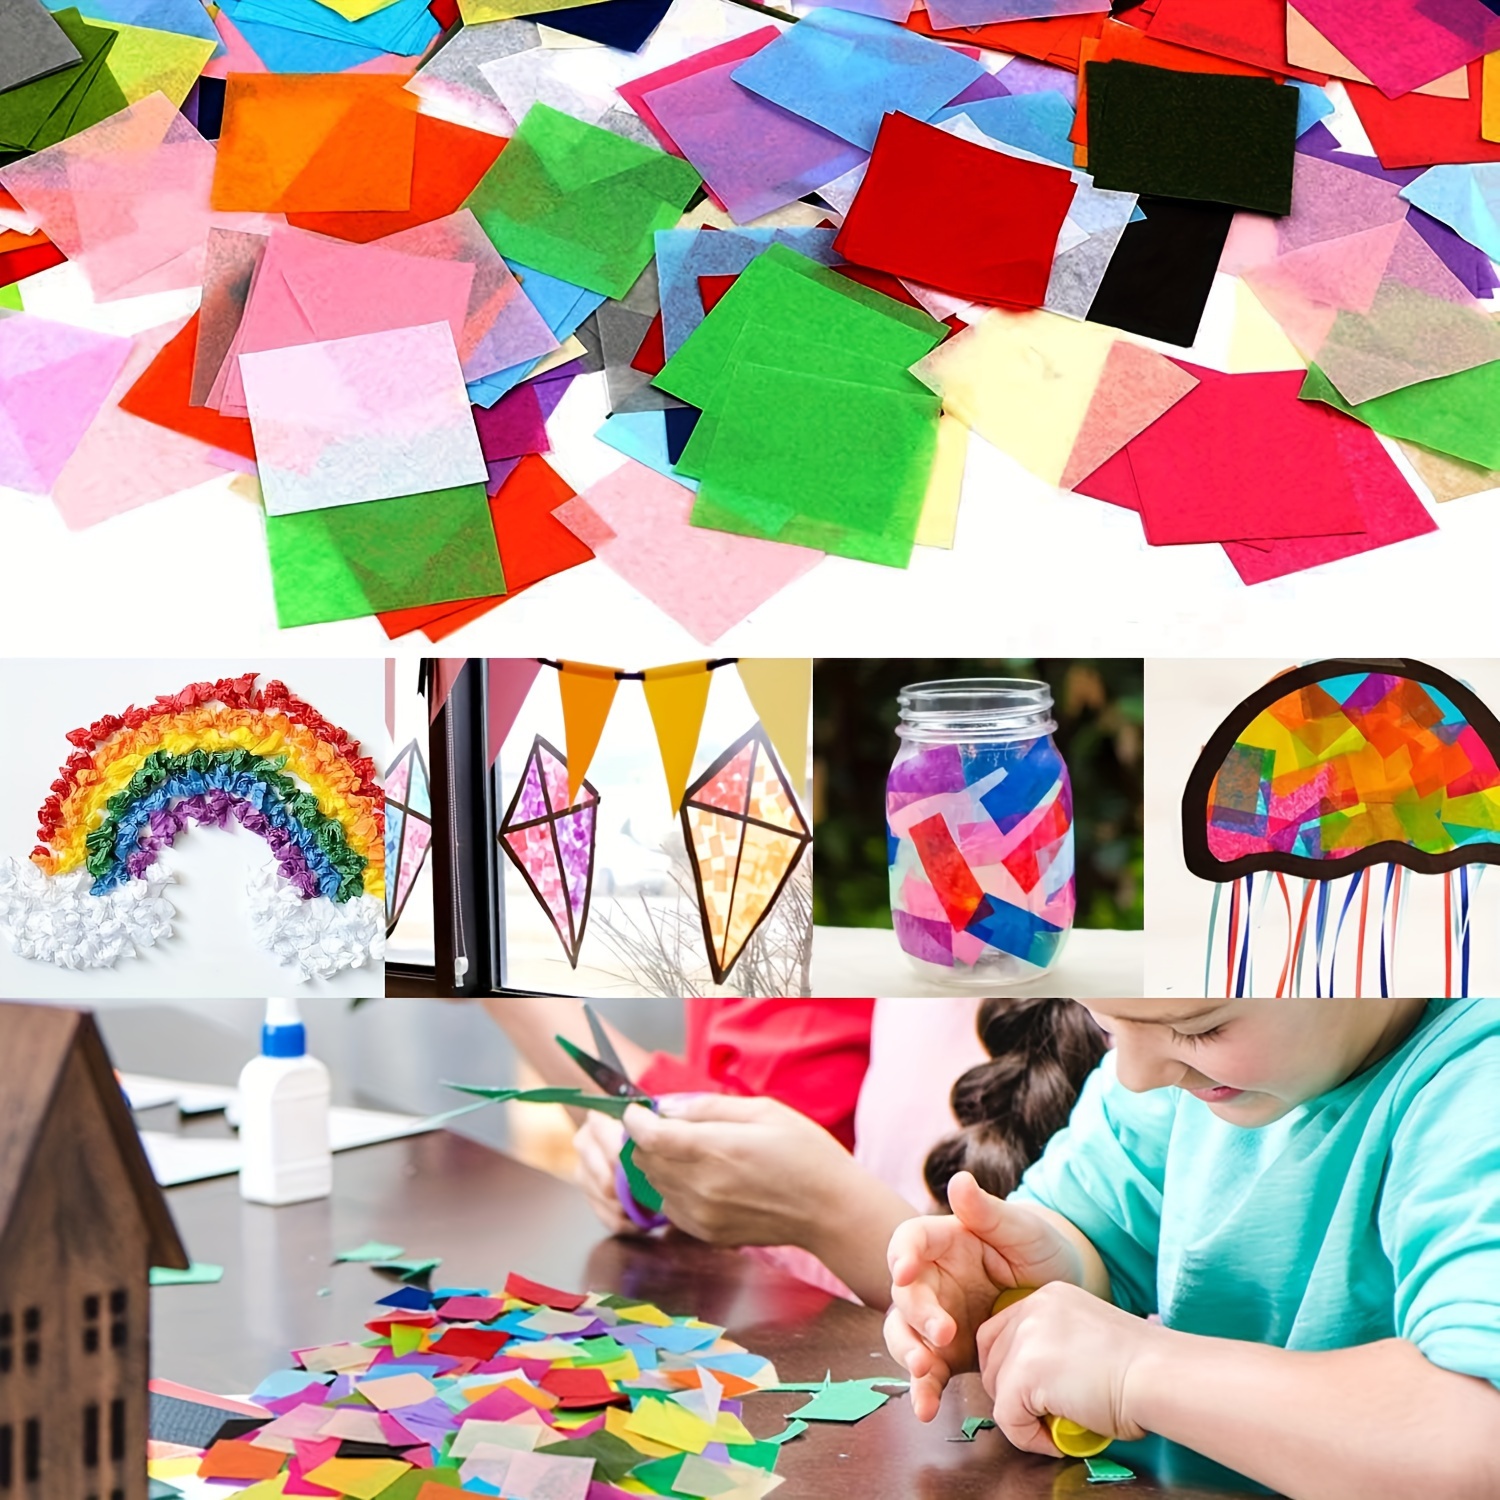 

3000-piece Rainbow Tissue Paper Squares Set, 2x2 Inch - Vibrant Craft Mosaic Sheets For Diy Projects, Scrunch Art & Classroom Activities - Firstop Premium Quality